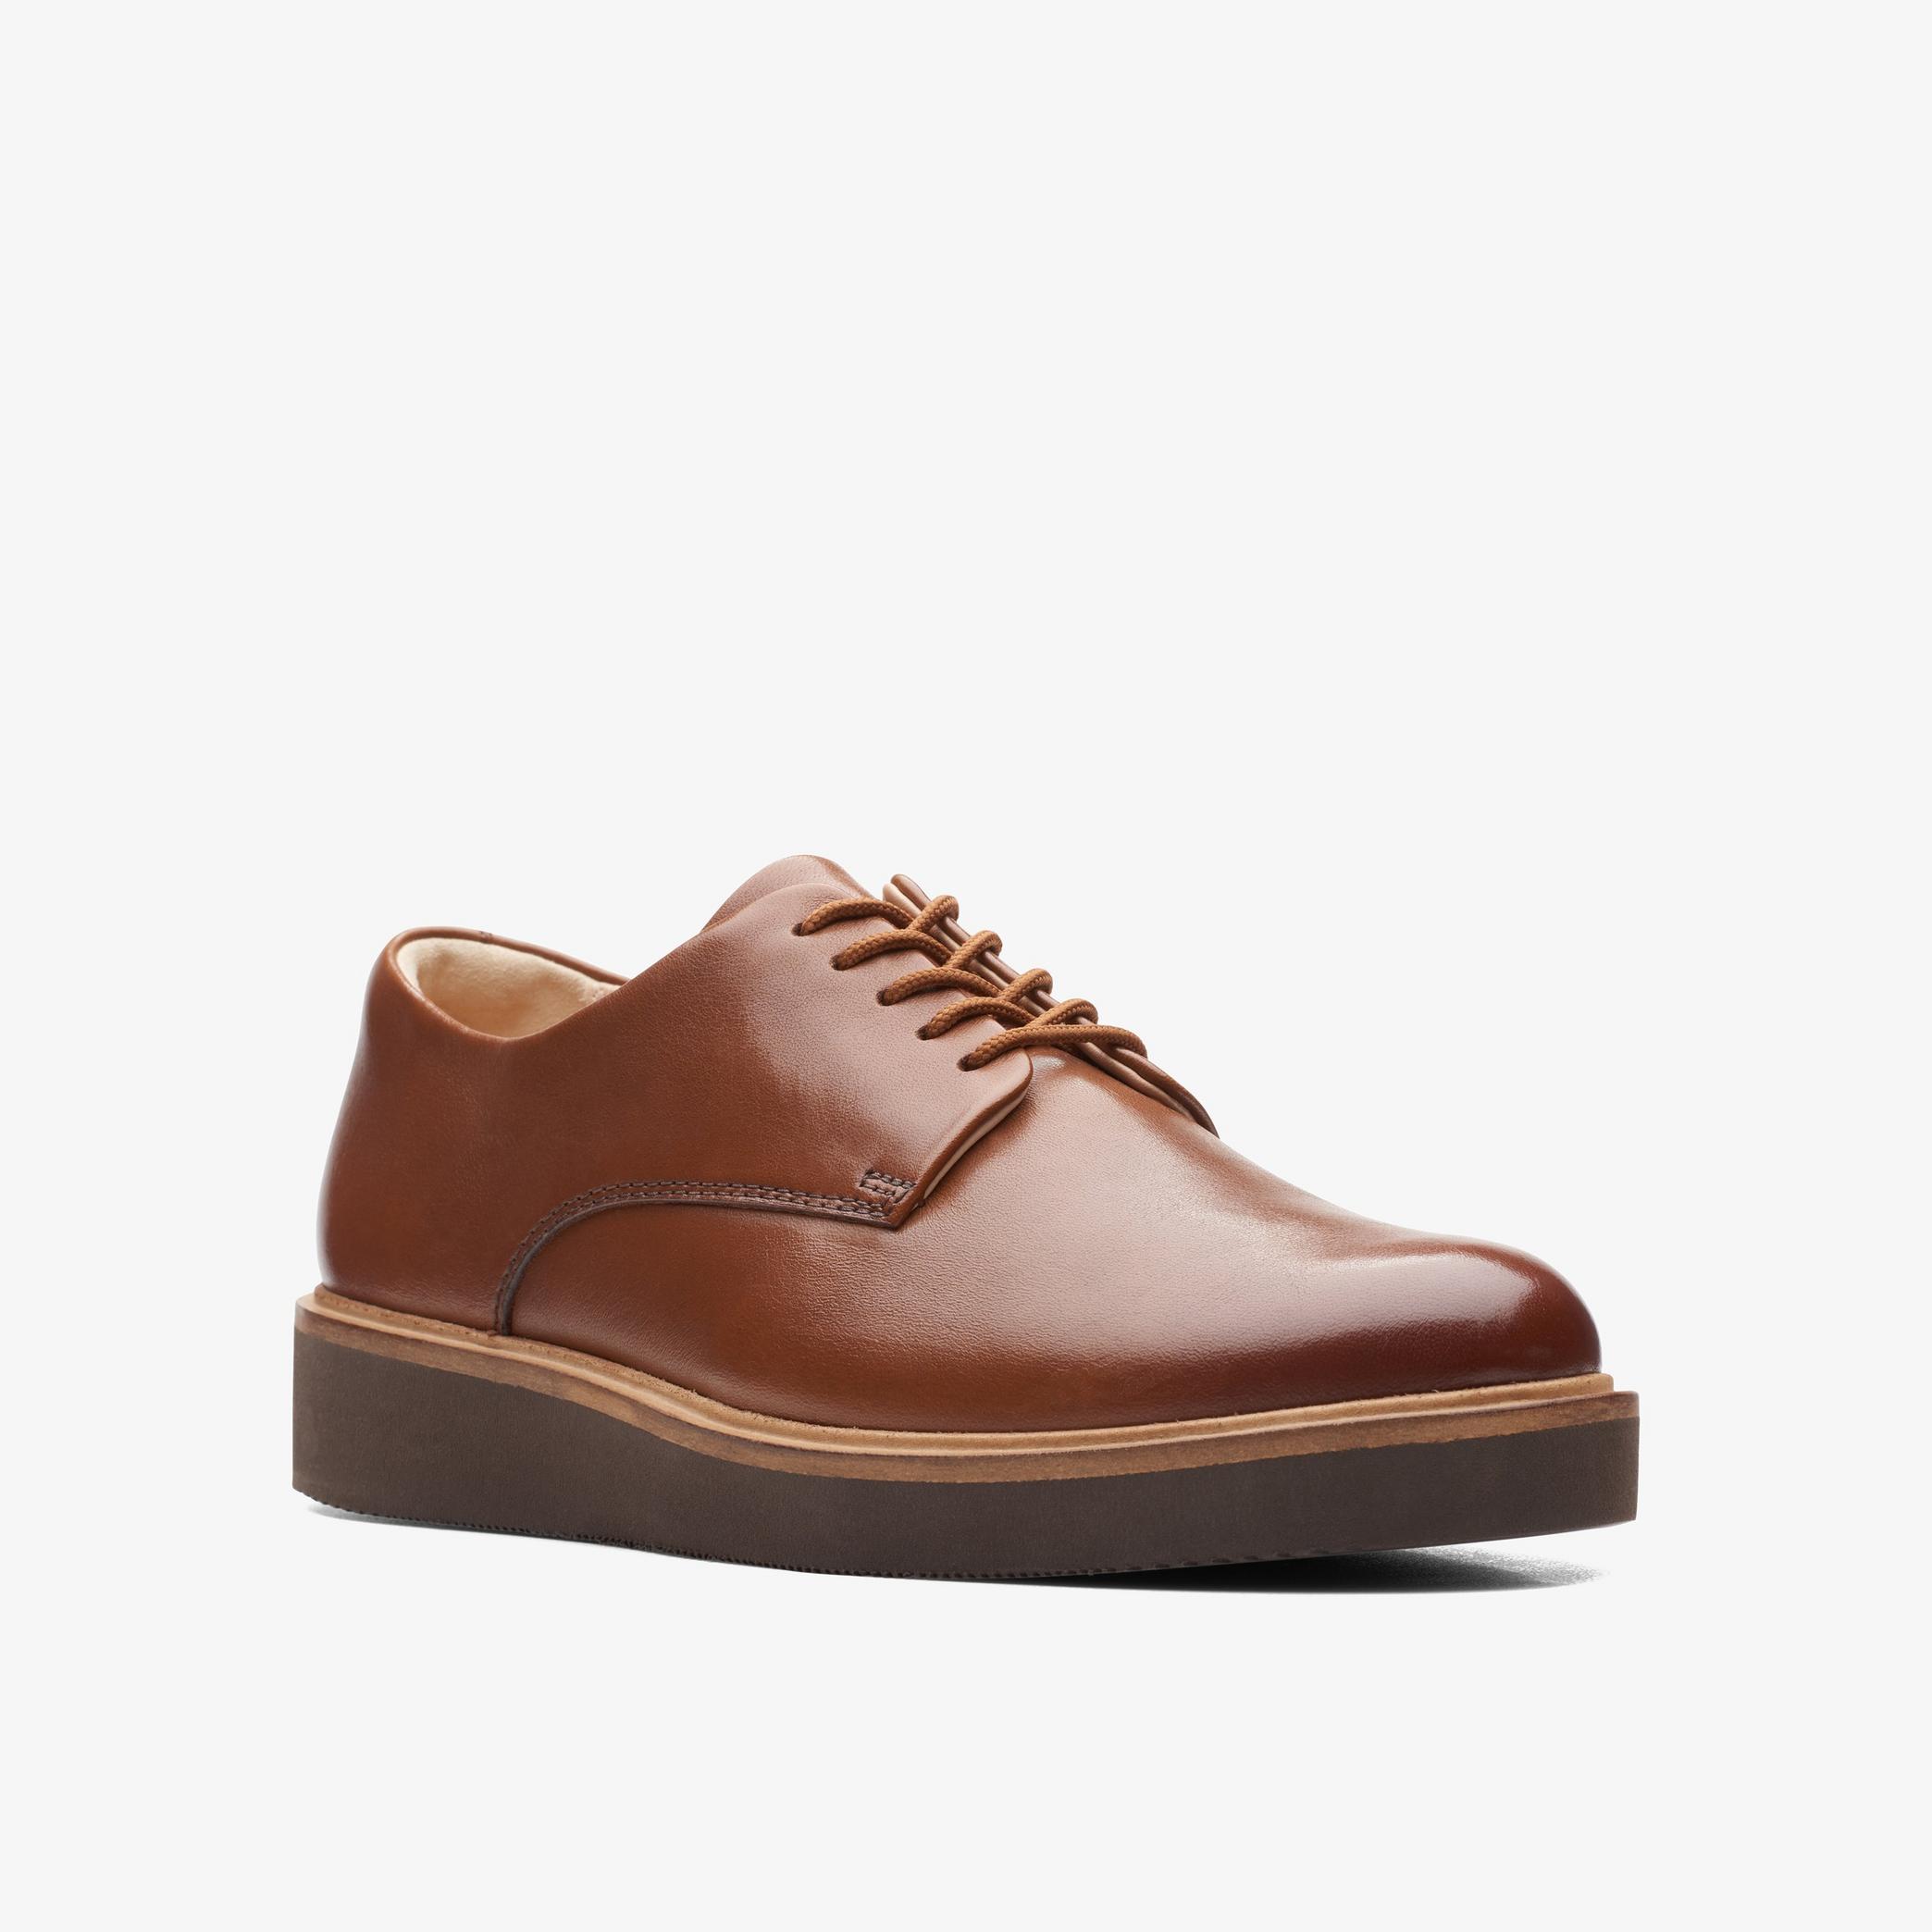 Glickly Derby Dark Tan Leather Derby Shoe, view 3 of 6